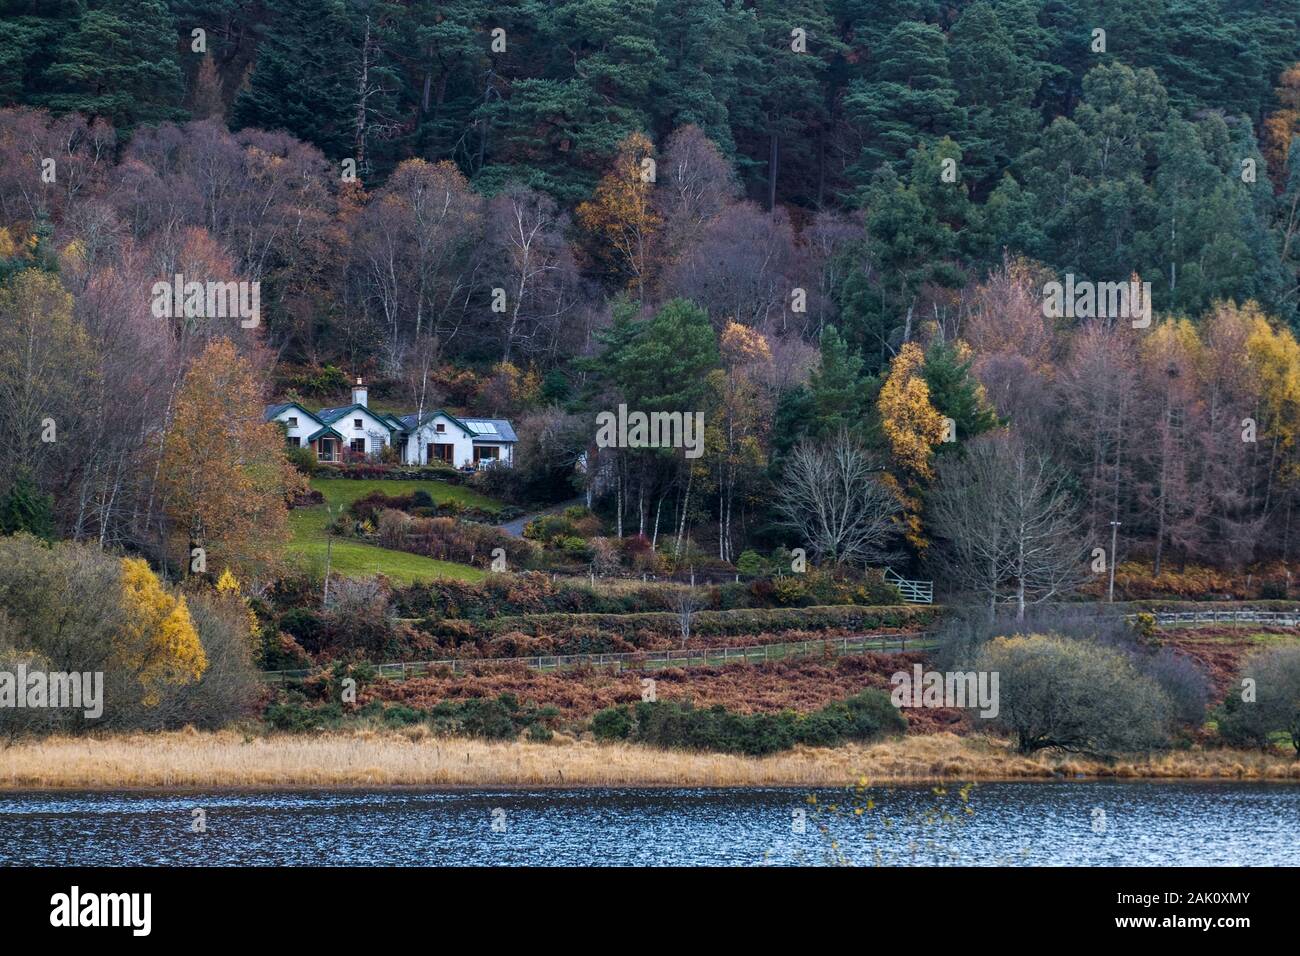 A white cottage stands in between an autumn forest and the upper lake of Glendalough in the national park of the Wicklow mountains in Ireland. Stock Photo